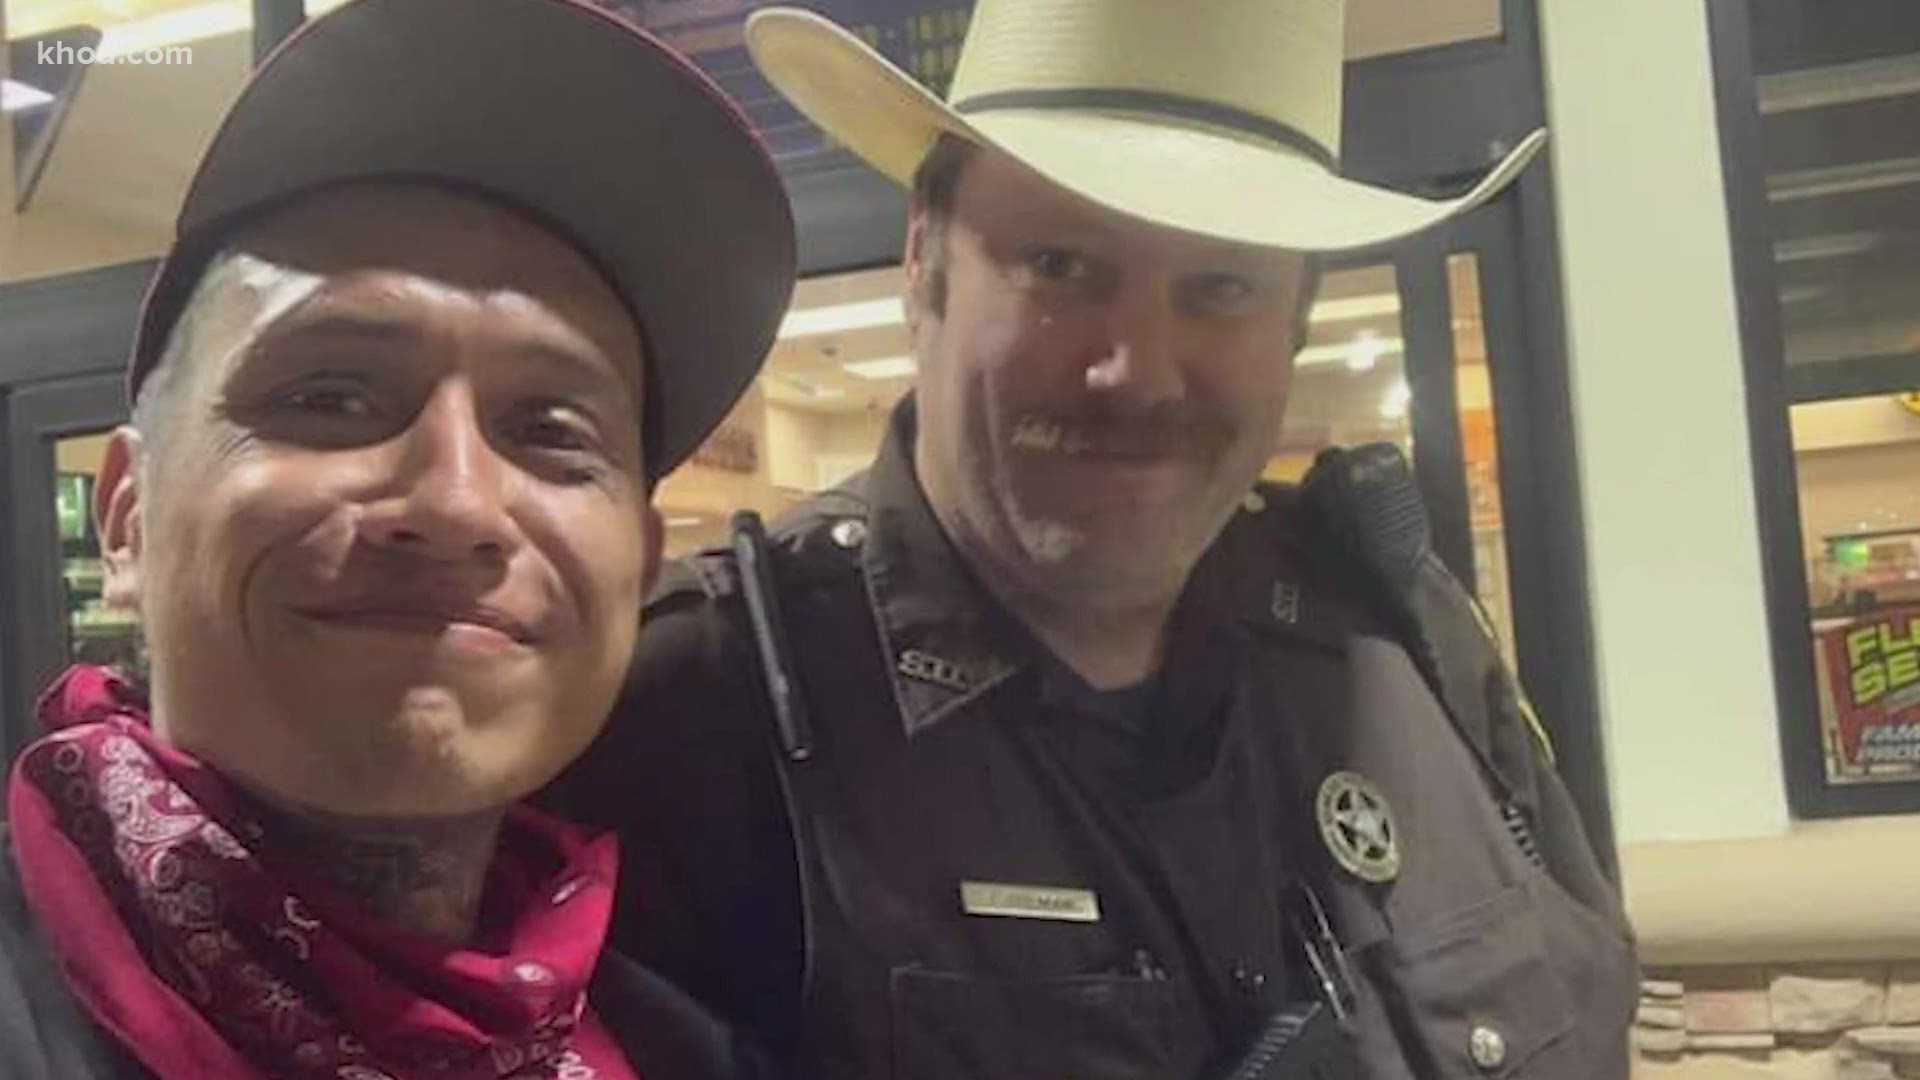 A now-viral photo of John Sanchez and Fort Bend County Sheriff's Deputy Jason Bulman is giving everyone an extra reason to hope.